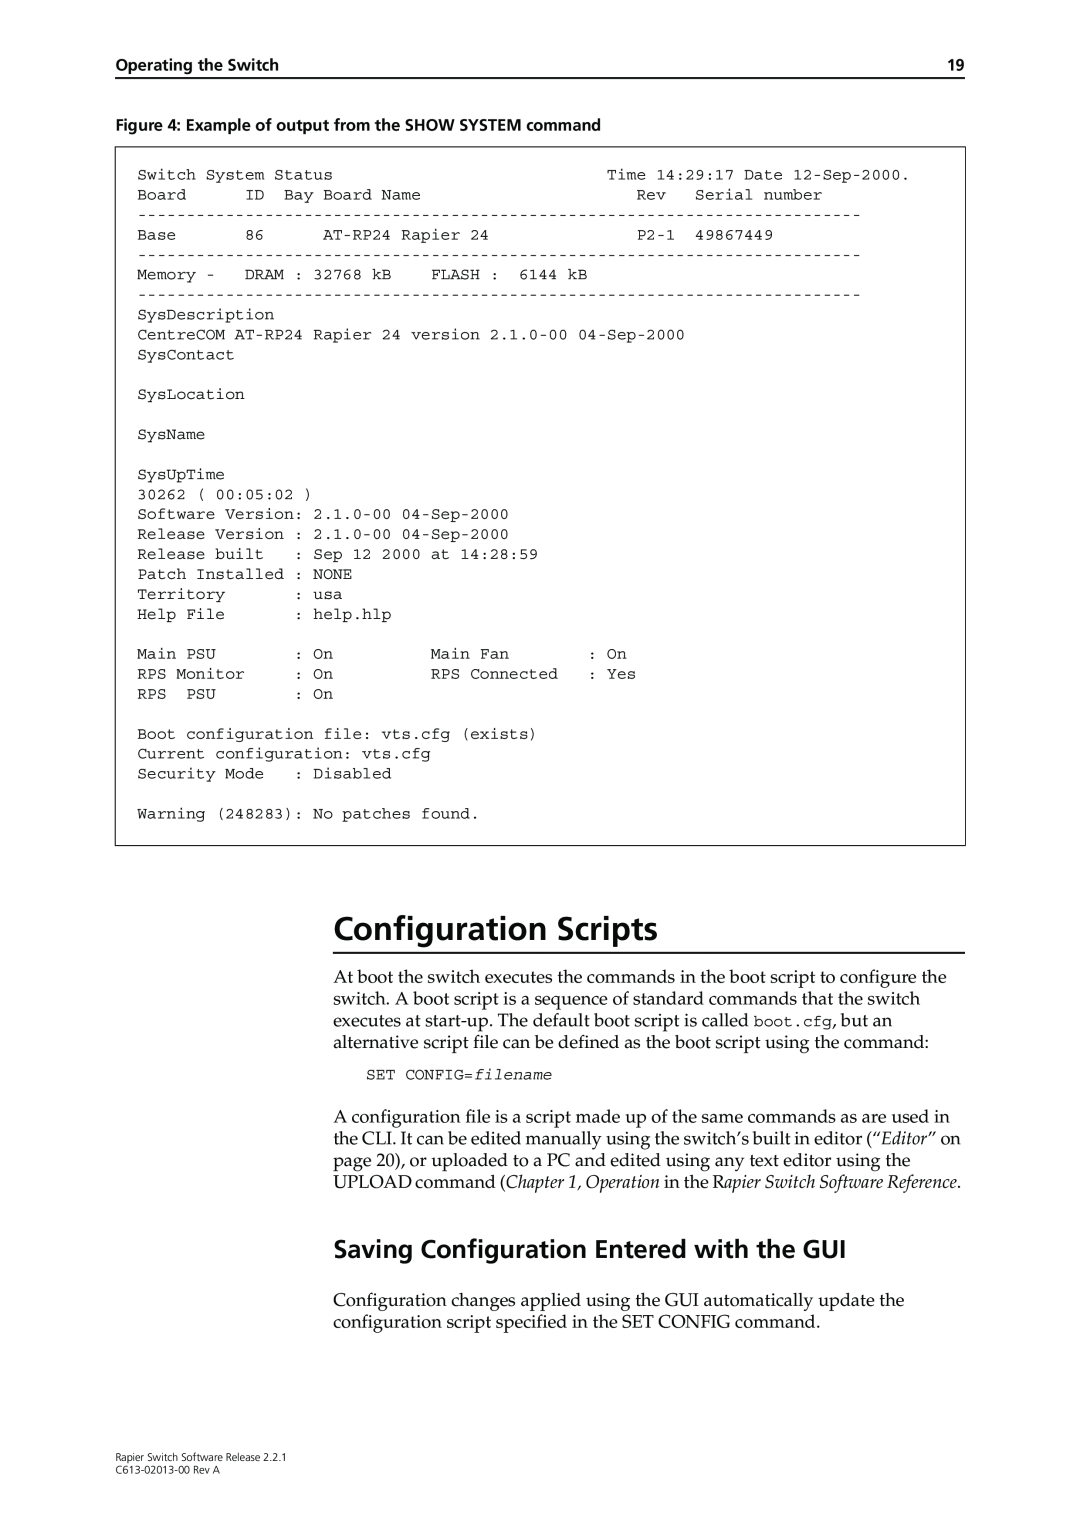 Allied Telesis C613-02013-00 manual Configuration Scripts, Saving Configuration Entered with the GUI 